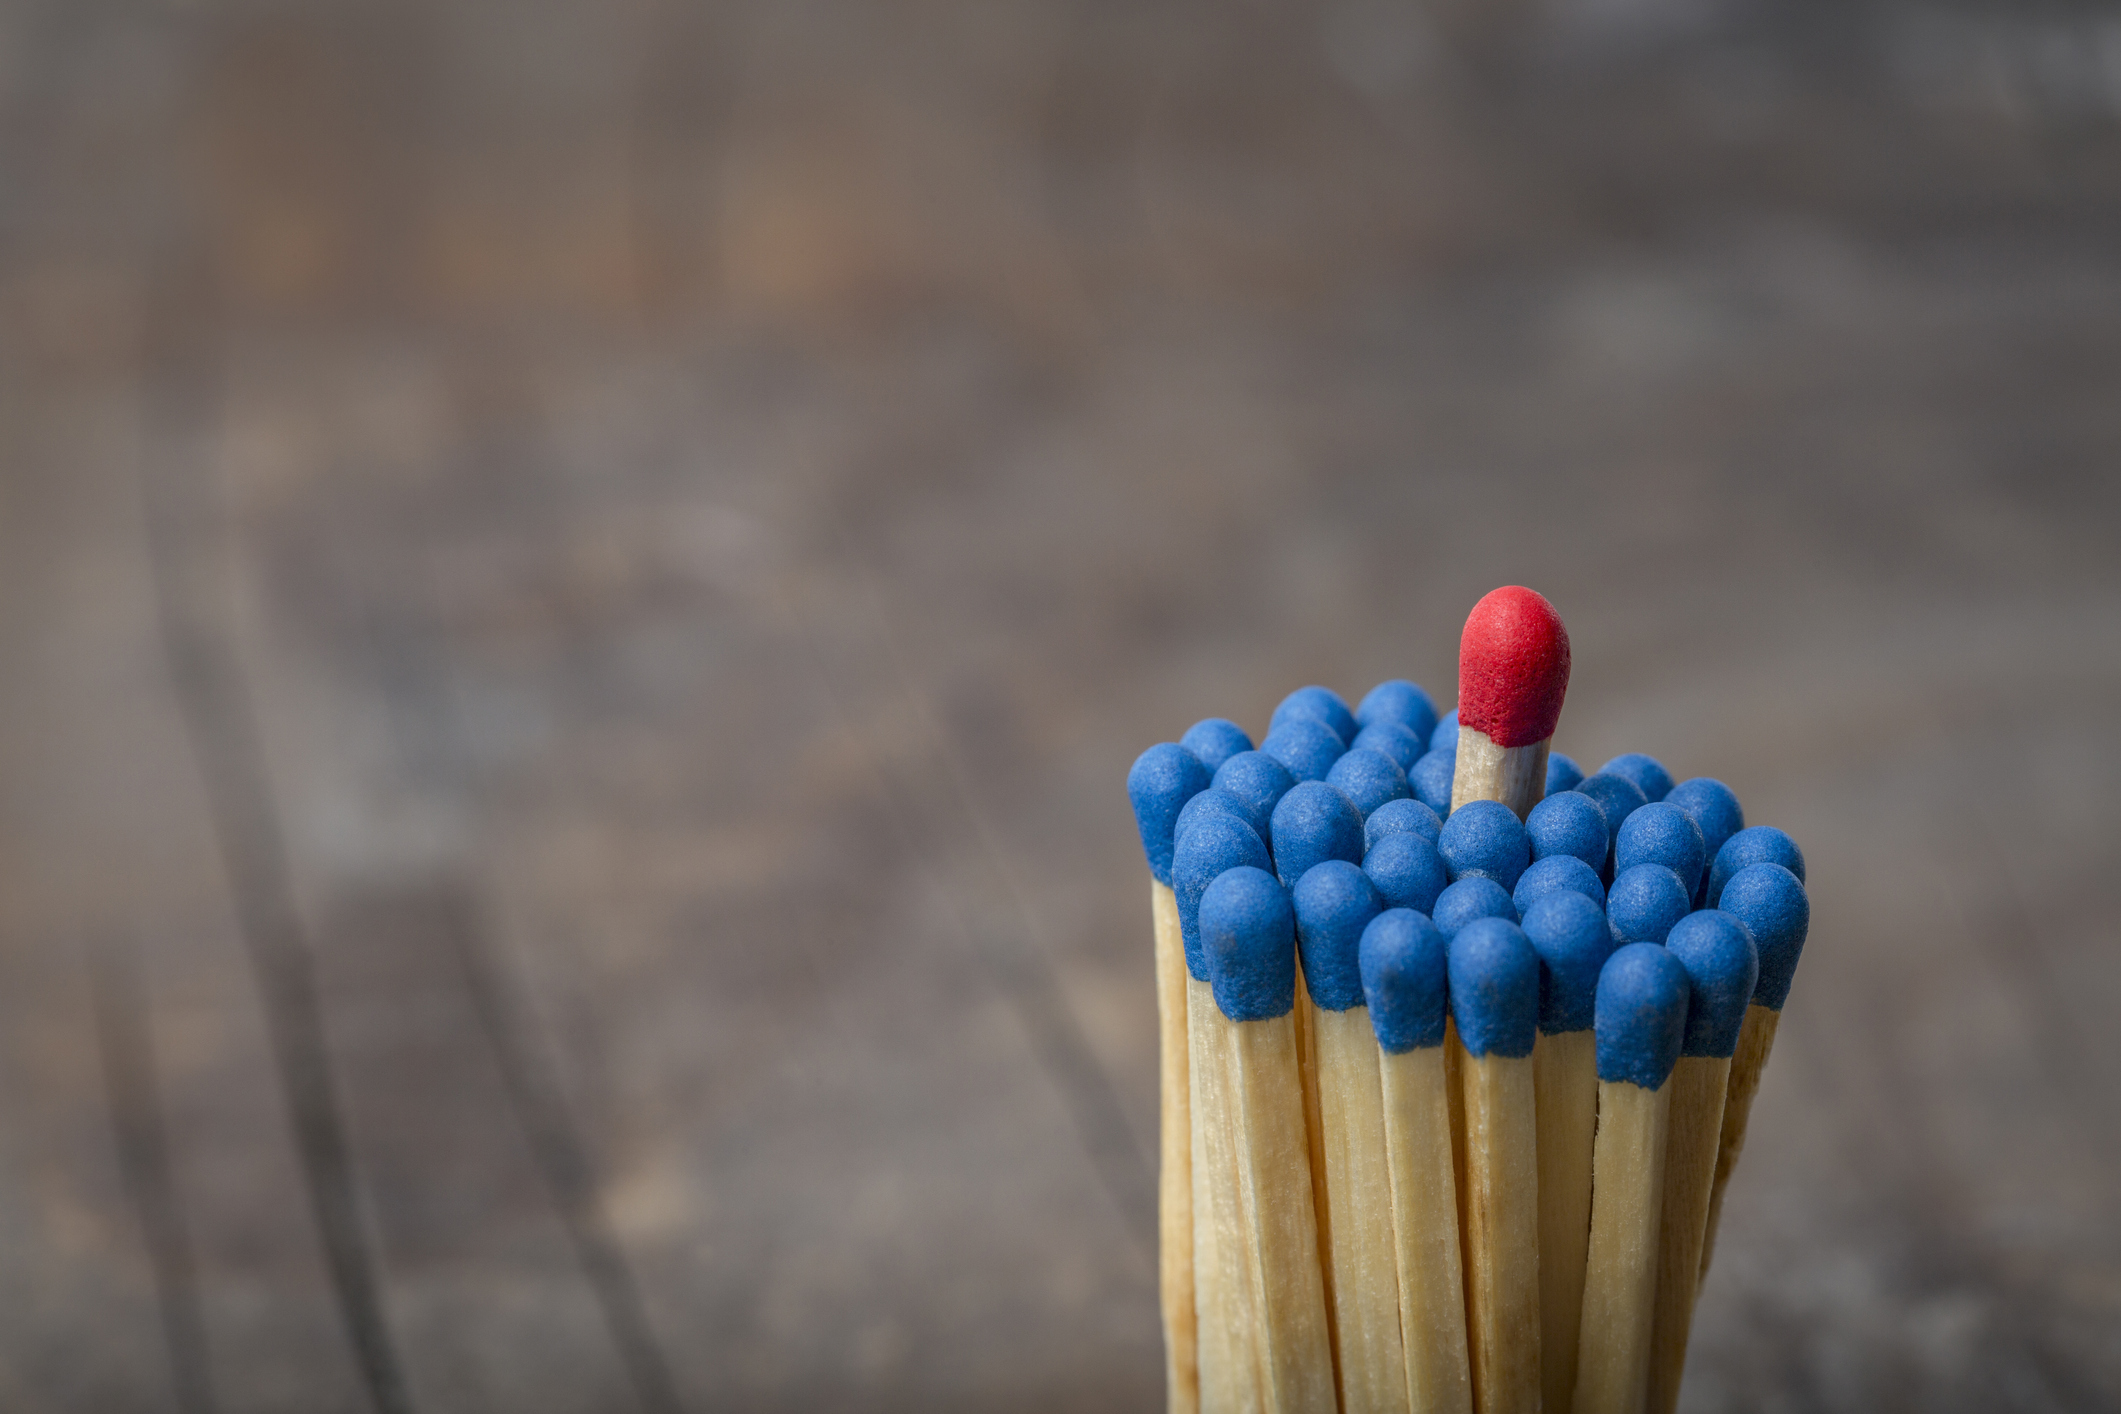 red match in group of blue matches